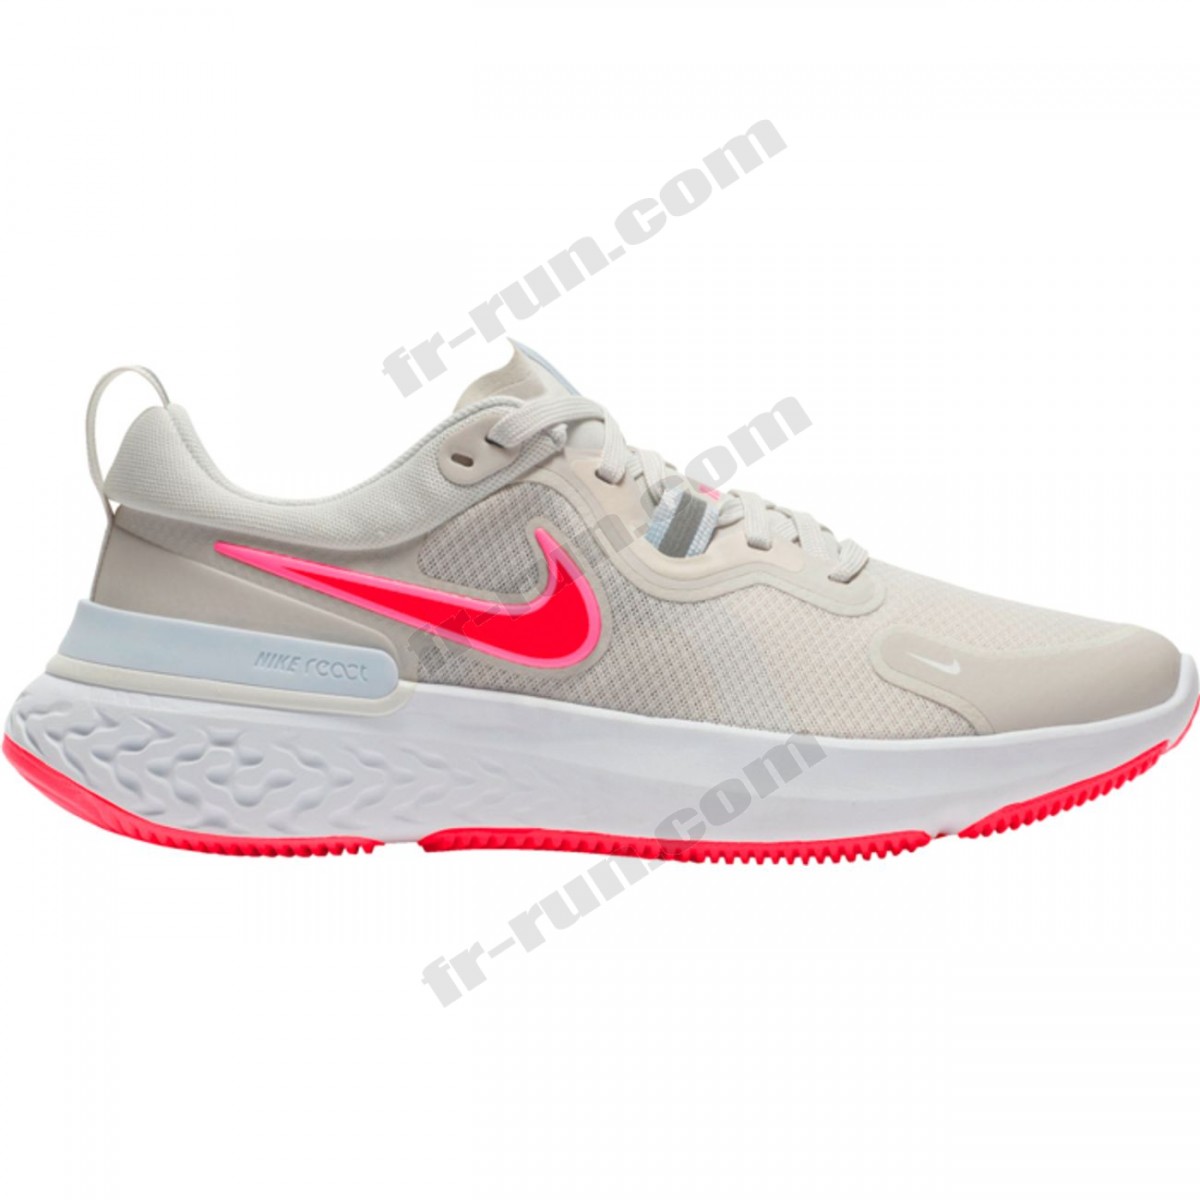 Nike/CHAUSSURES BASSES running femme NIKE WMNS NIKE REACT MILER √ Nouveau style √ Soldes - -0